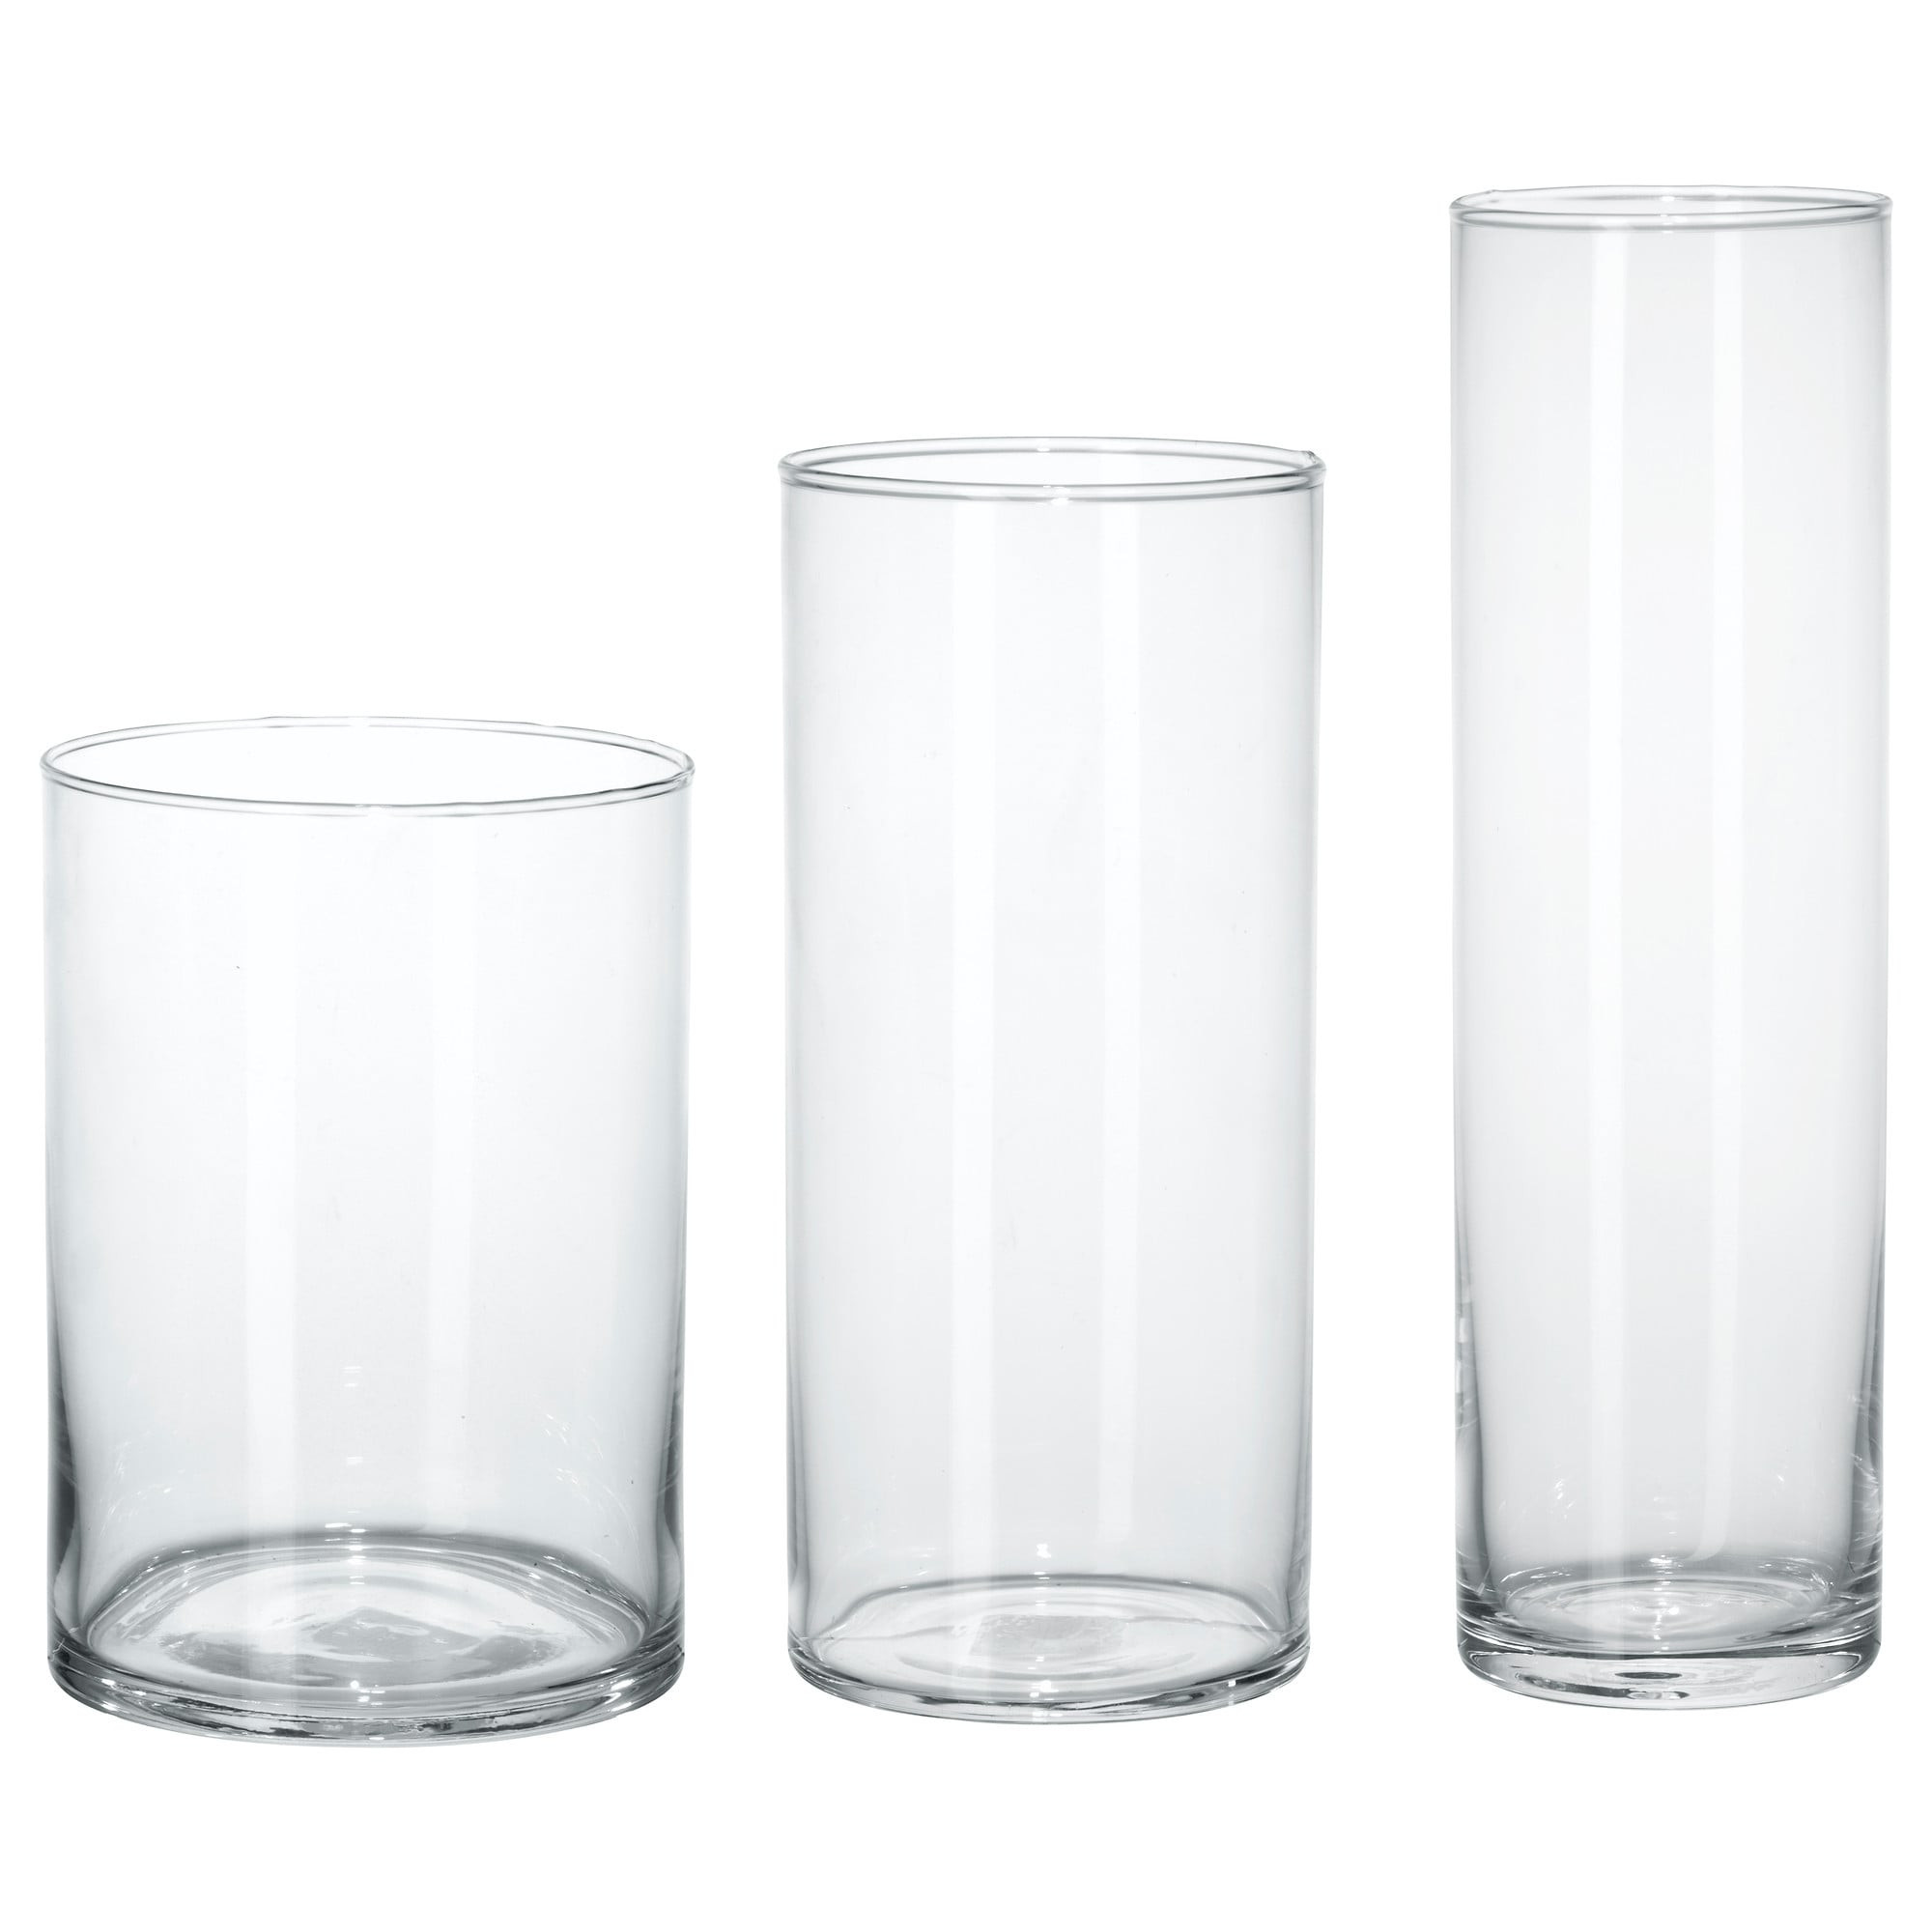 10 Lovable Large Vases for Living Room 2024 free download large vases for living room of cylinder vase set of 3 ikea regarding english franac2a7ais